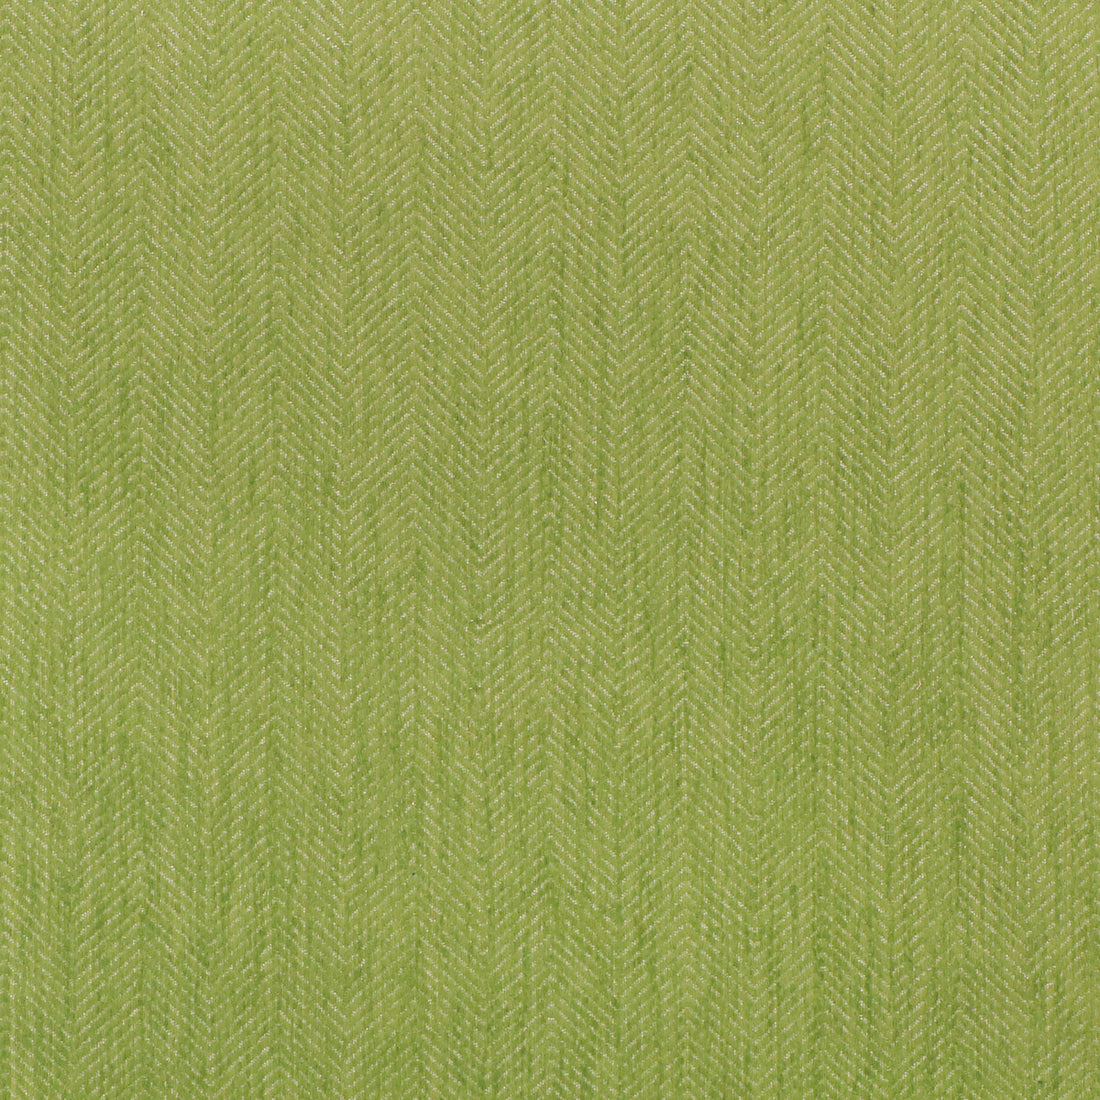 Kravet Smart fabric in 35361-3 color - pattern 35361.3.0 - by Kravet Smart in the Inside Out Performance Fabrics collection